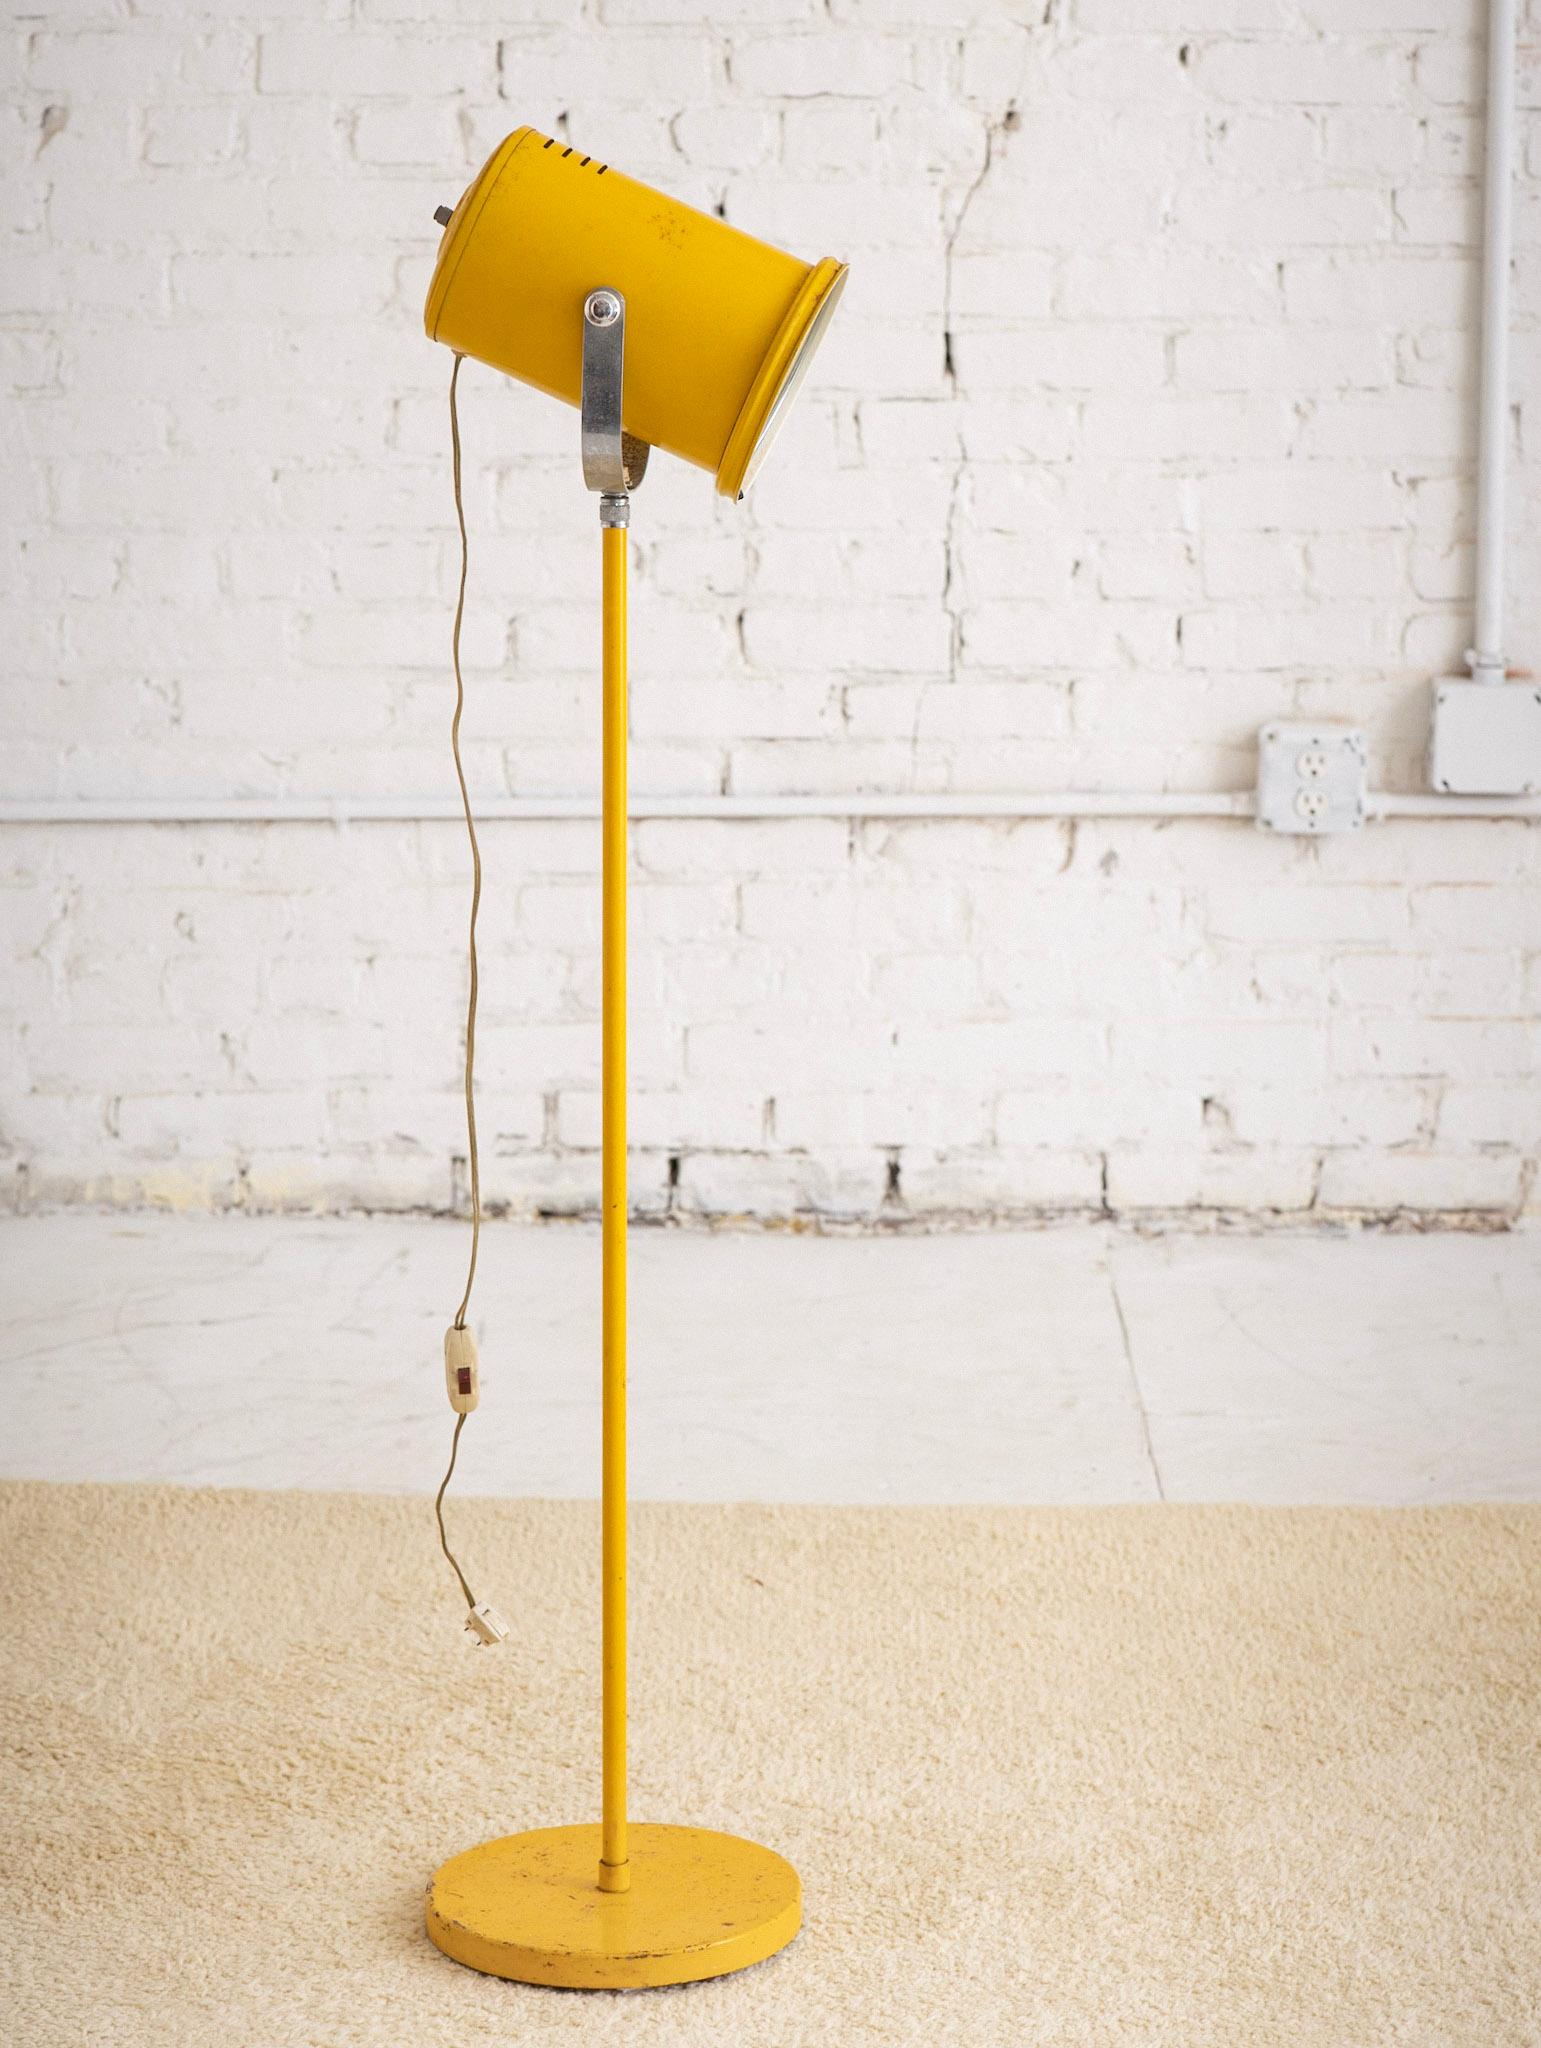 Mid Century industrial floor lamp. Original yellow coating has developed a heavy patina. Upper canister features a glass shade held in place by a tension support. Canister can be adjusted to point at desired direction. Note the current cord is quite